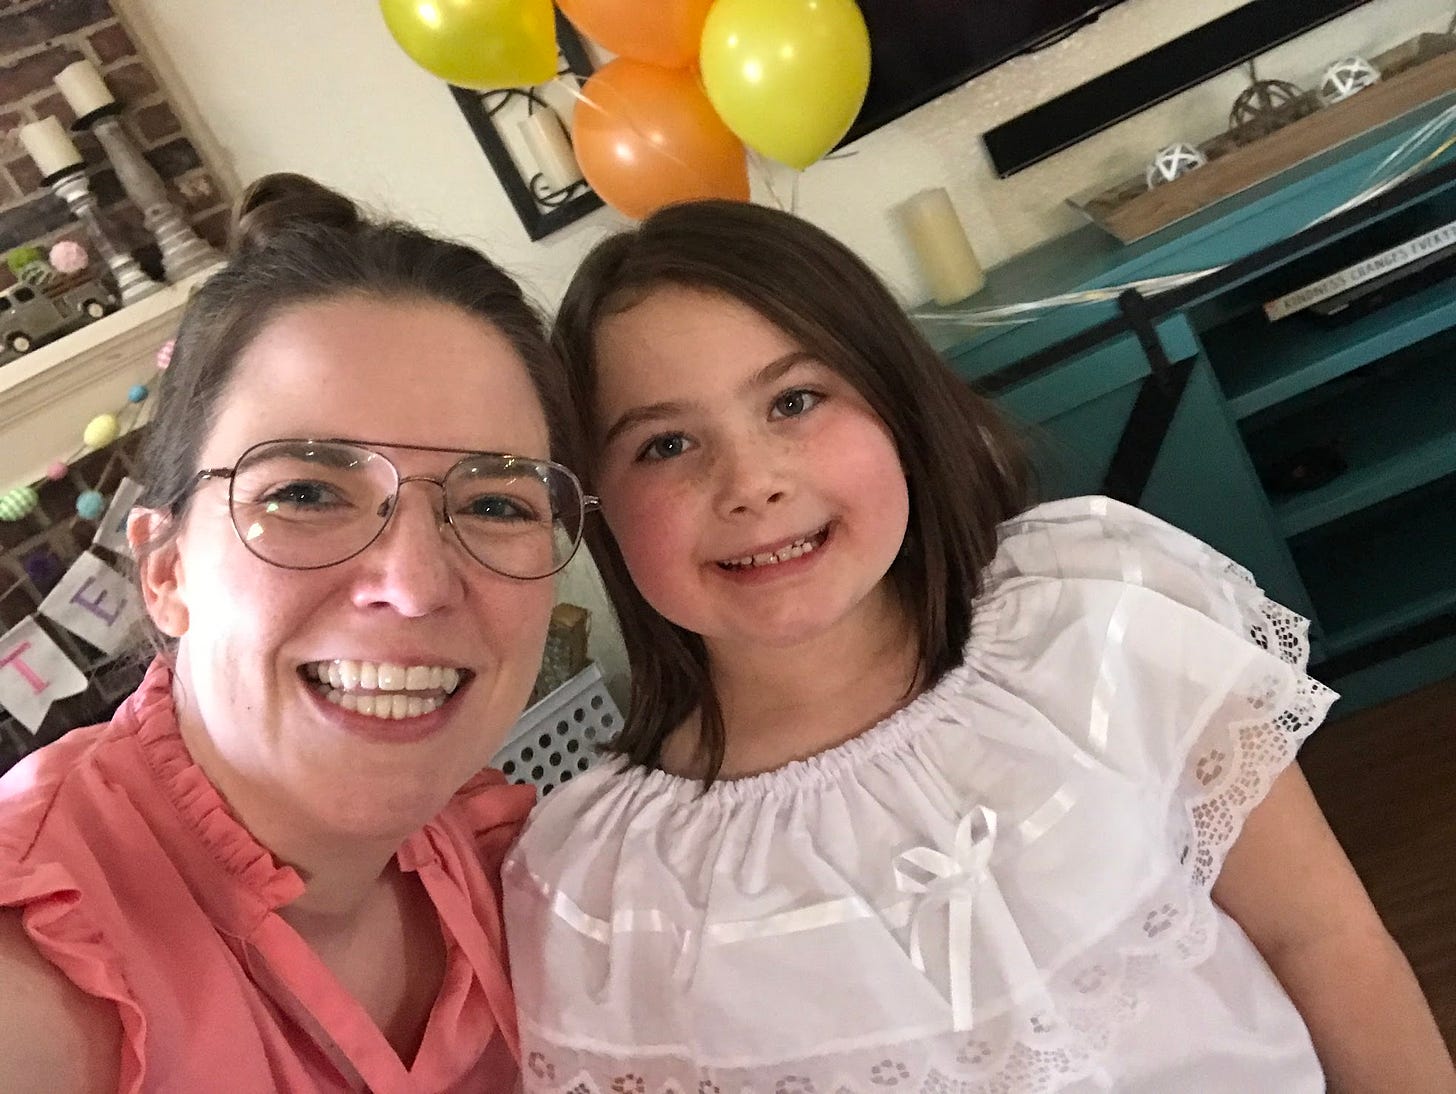 Holly and Audrey selfie at Audrey's ninth birthday party.